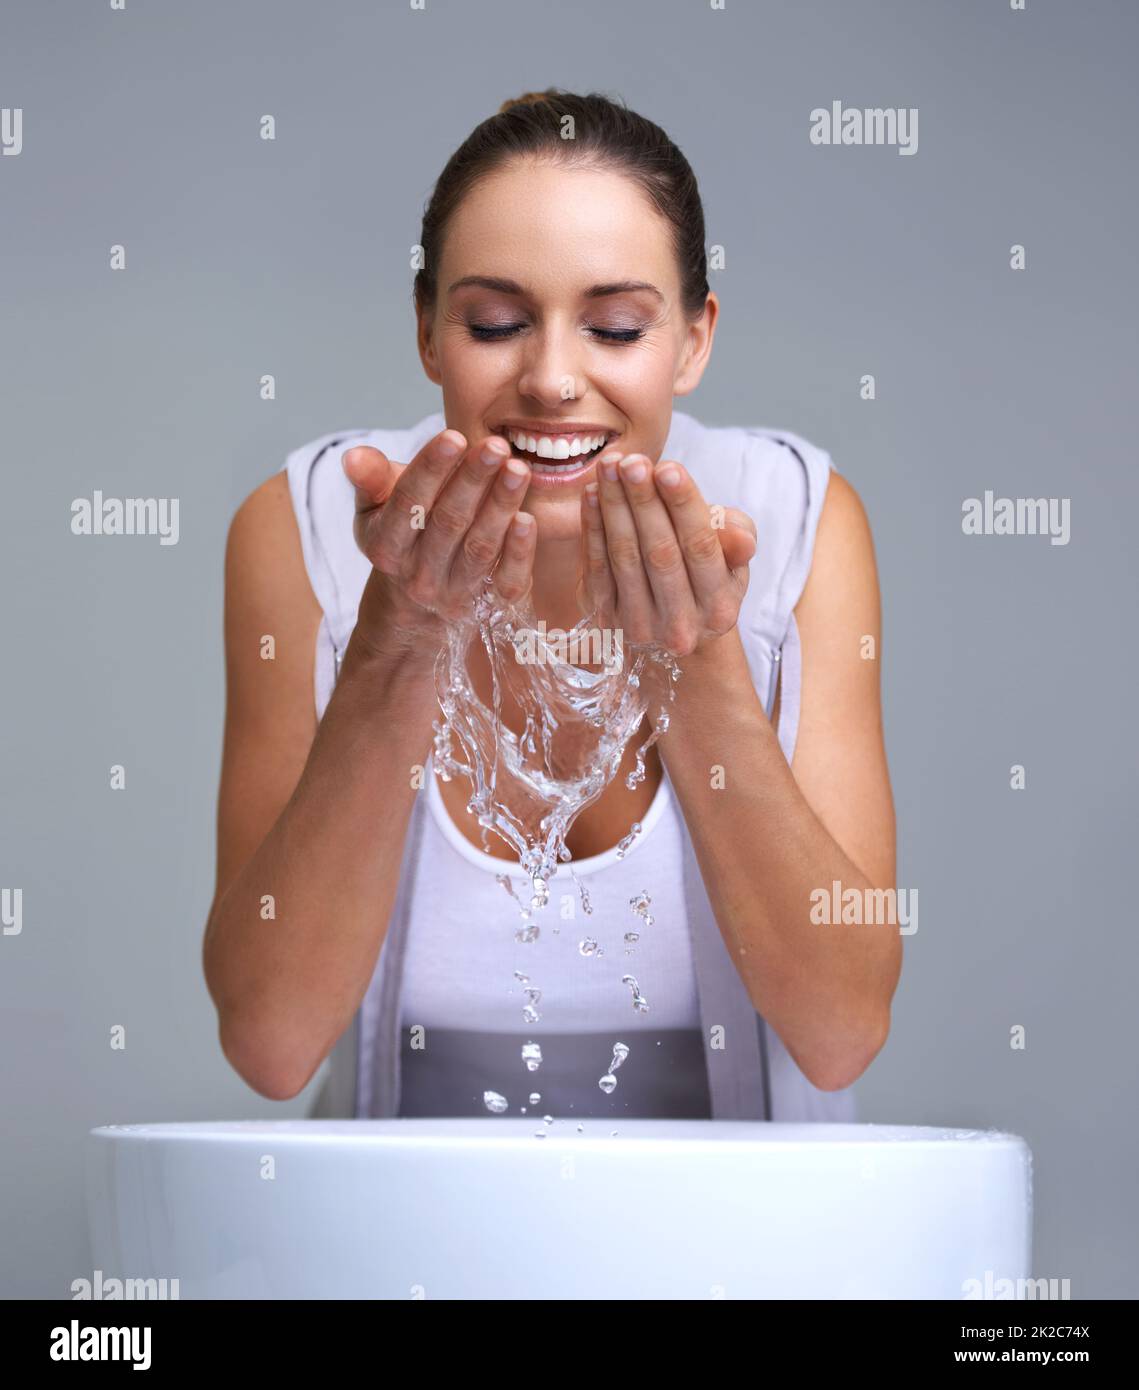 Aah, so refreshing. An attractive young woman washing her face. Stock Photo